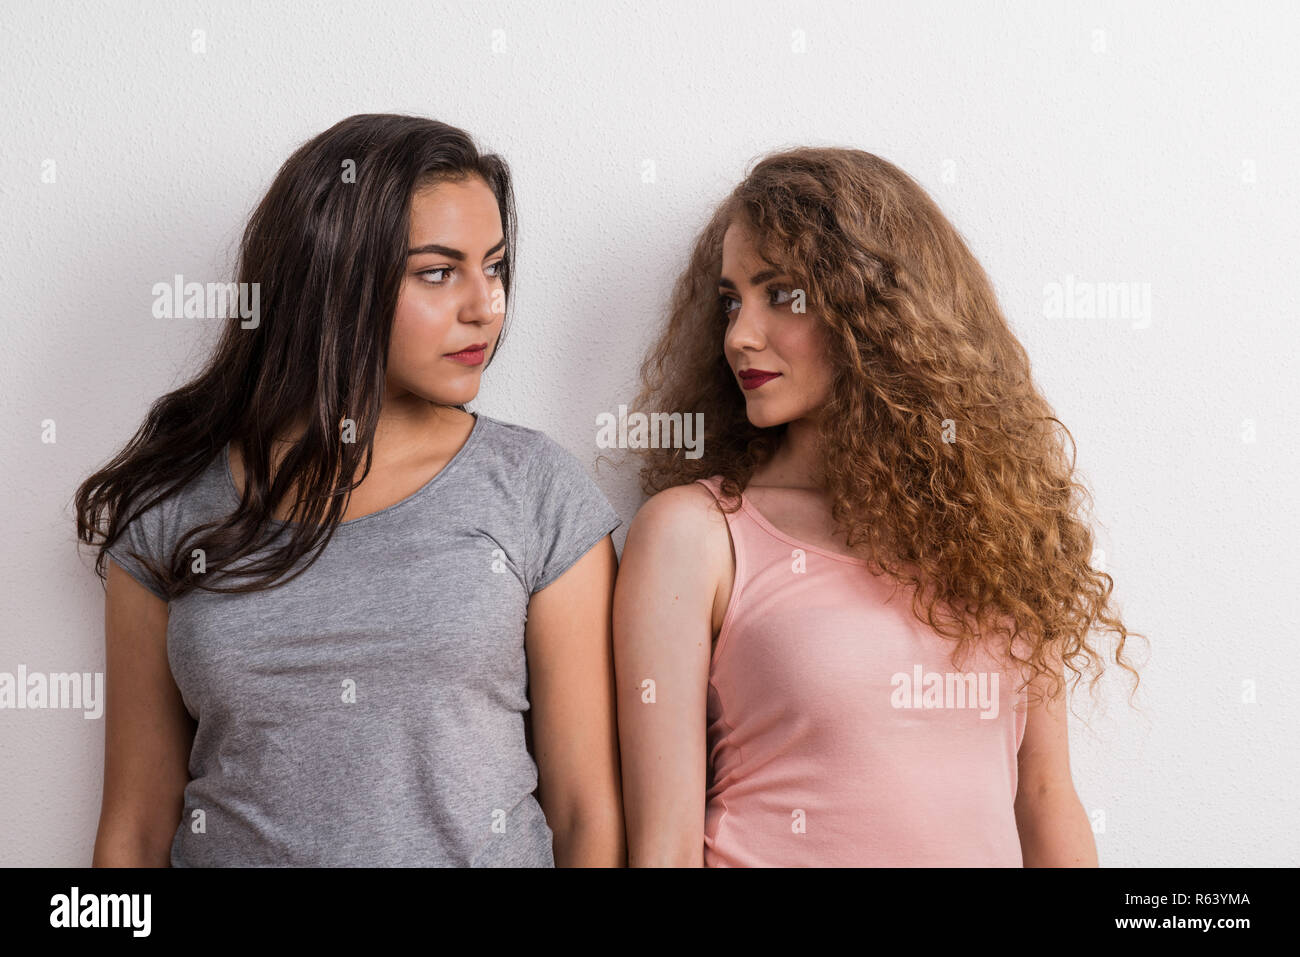 Young beautiful serious women in studio, looking at each other. Stock Photo